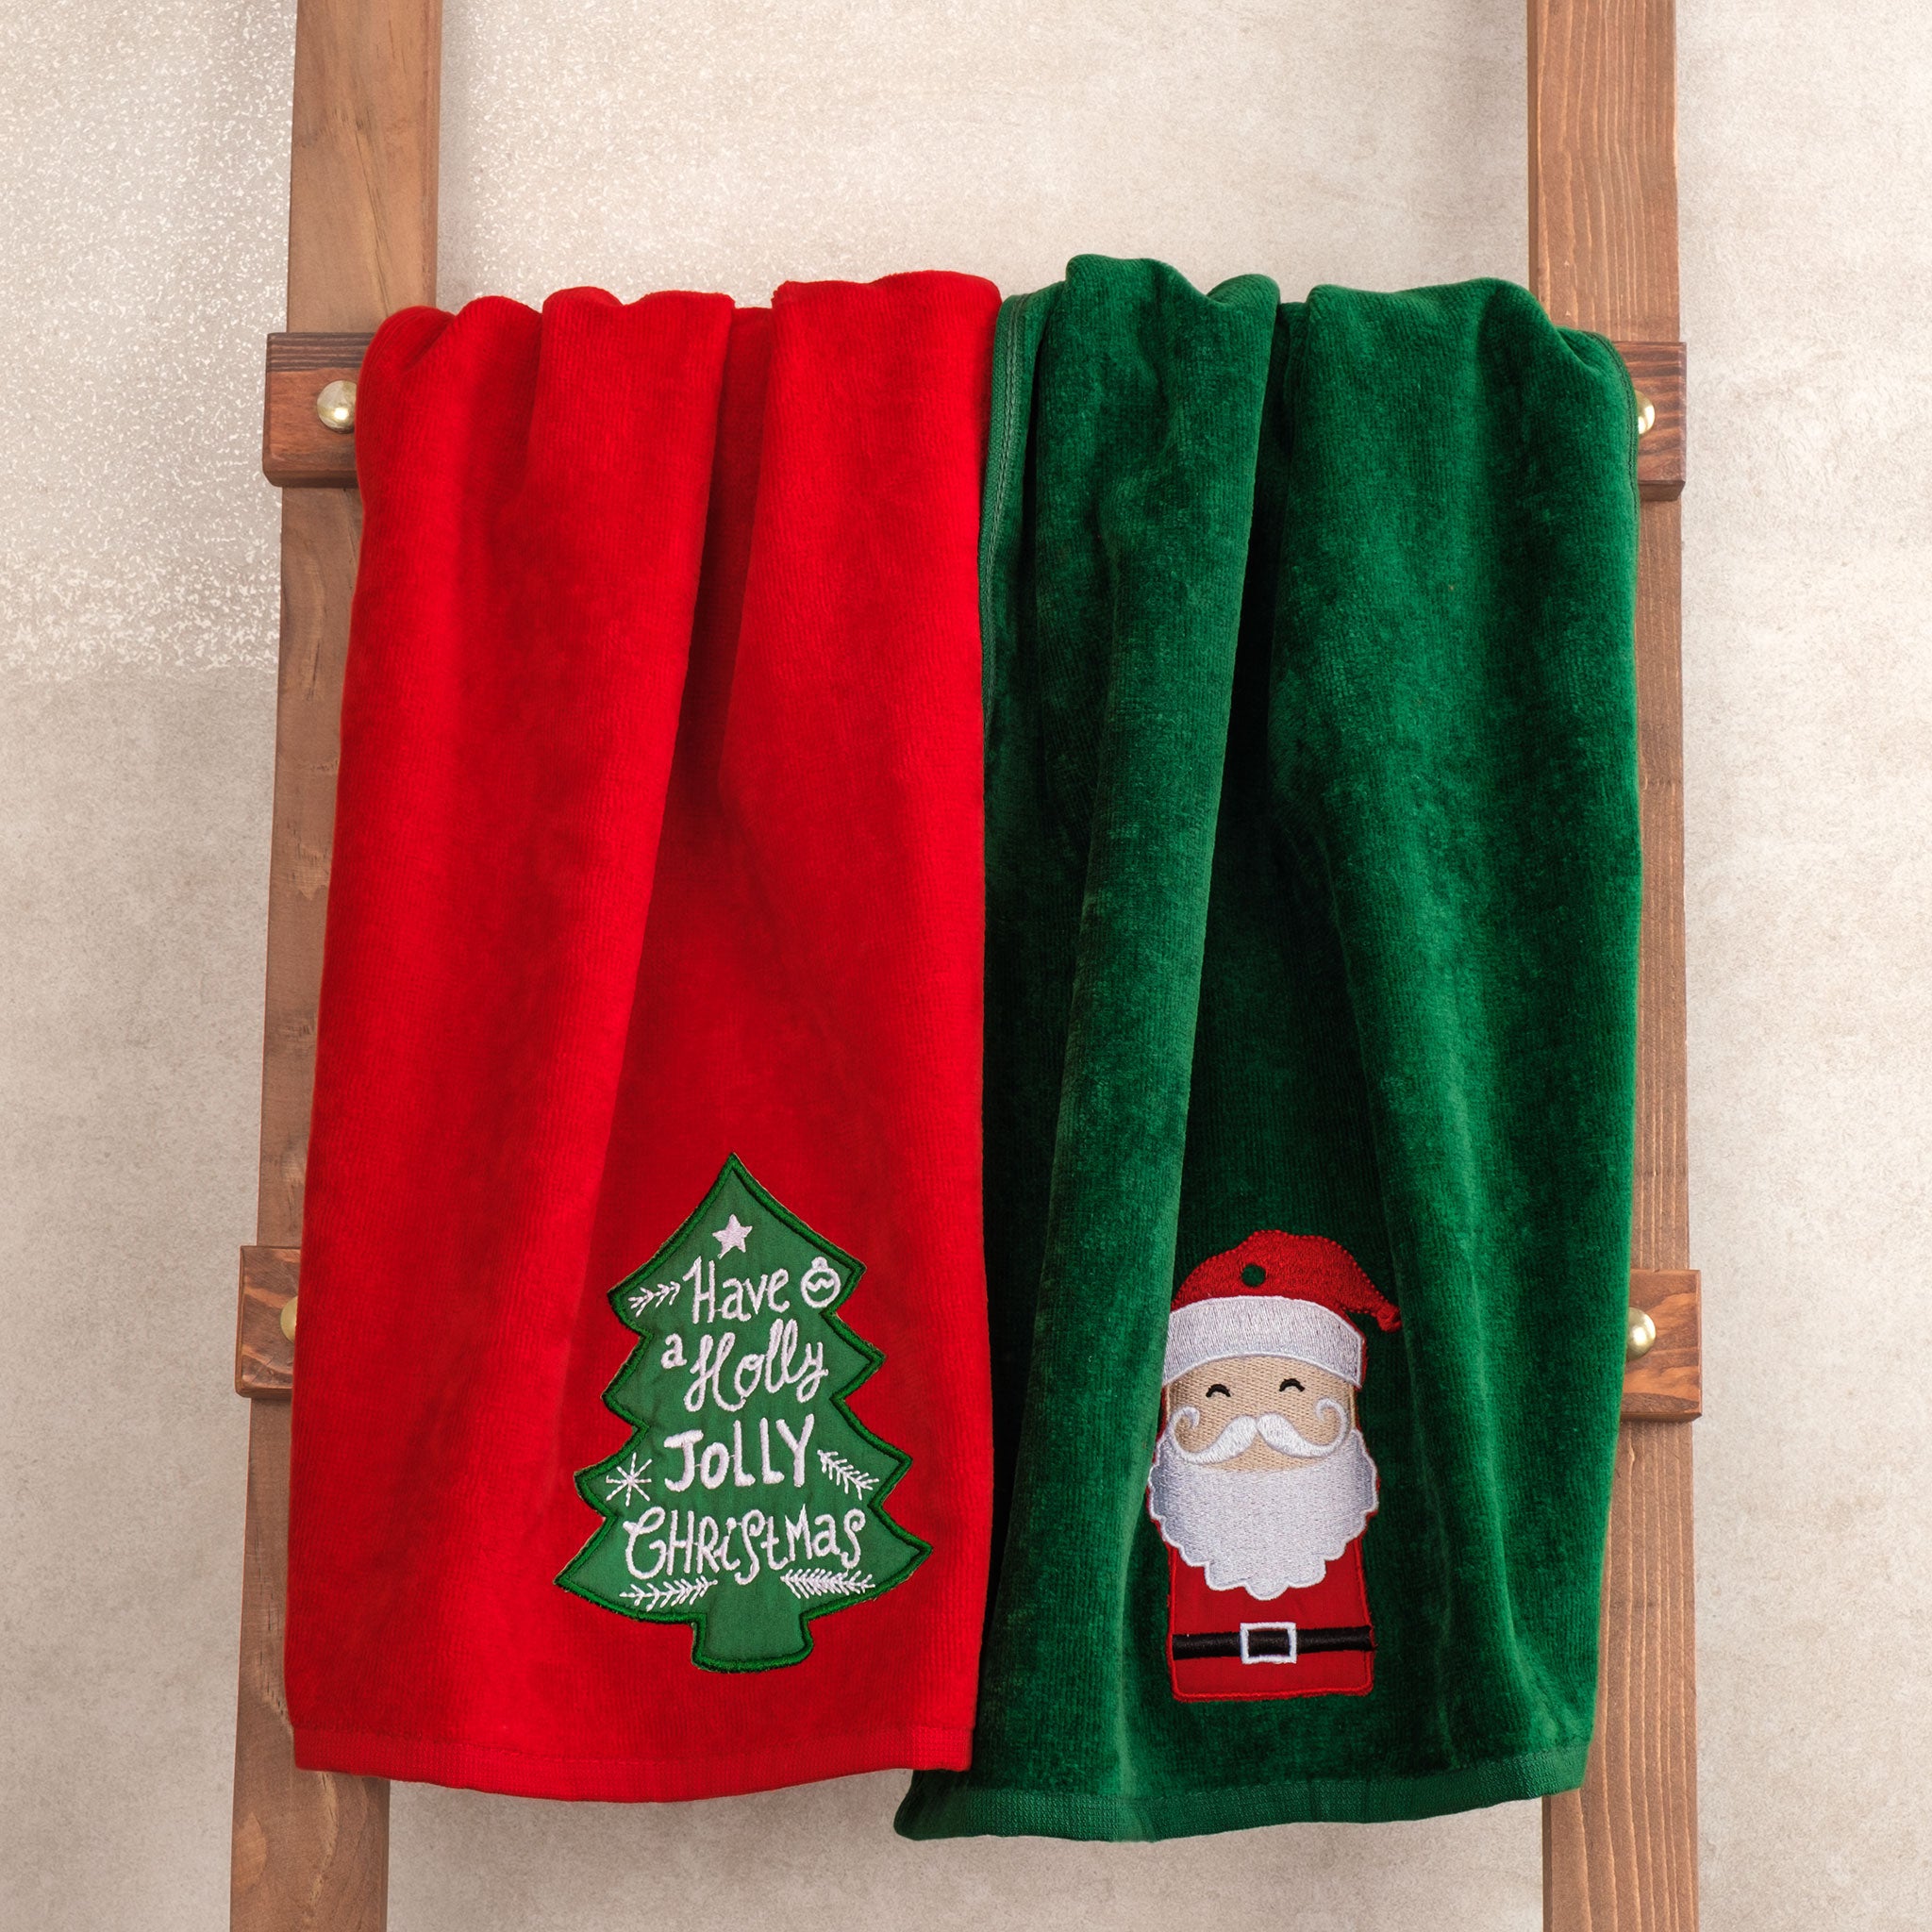 American Soft Linen Christmas Towels Bathroom Set, 2 Packed Embroidered Decorative 100% Cotton Hand Towels, Dish Towels for Decor Xmas, Santa Tree